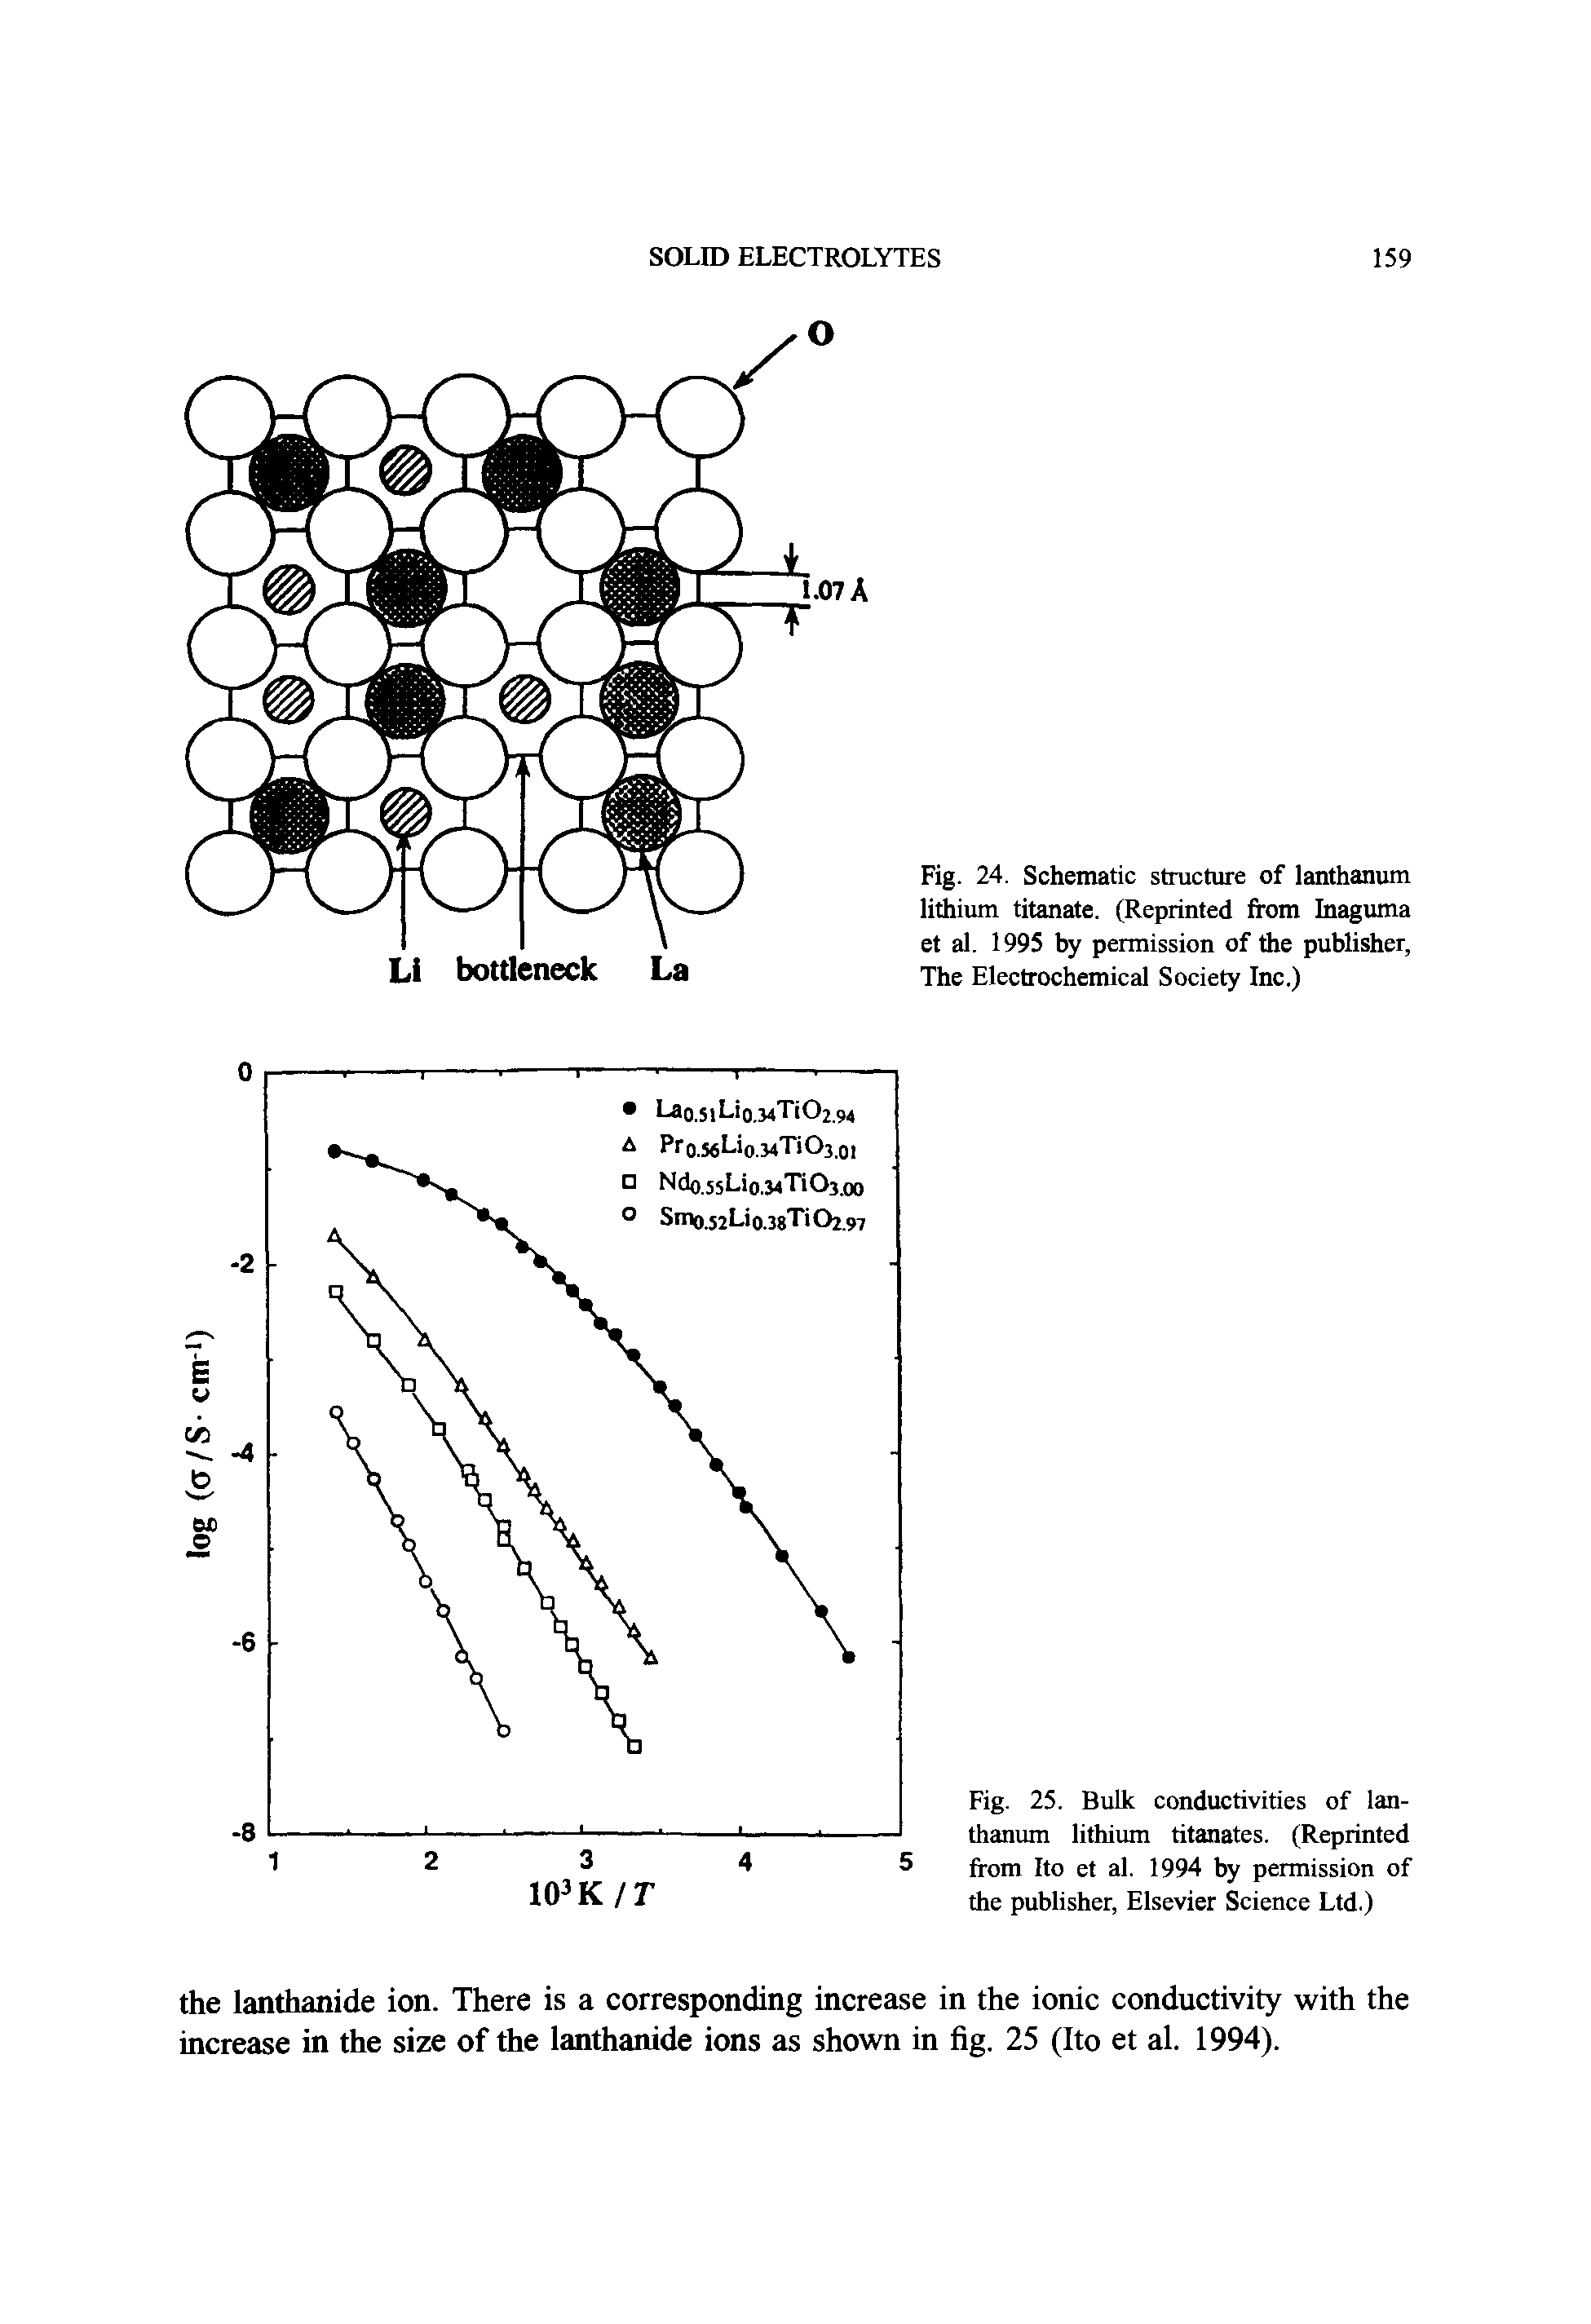 Fig. 24. Schematic structure of lanthanum lithium titanate. (Reprinted from Inaguma et al. 1995 by permission of the publisher, The Electrochemical Society Inc.)...